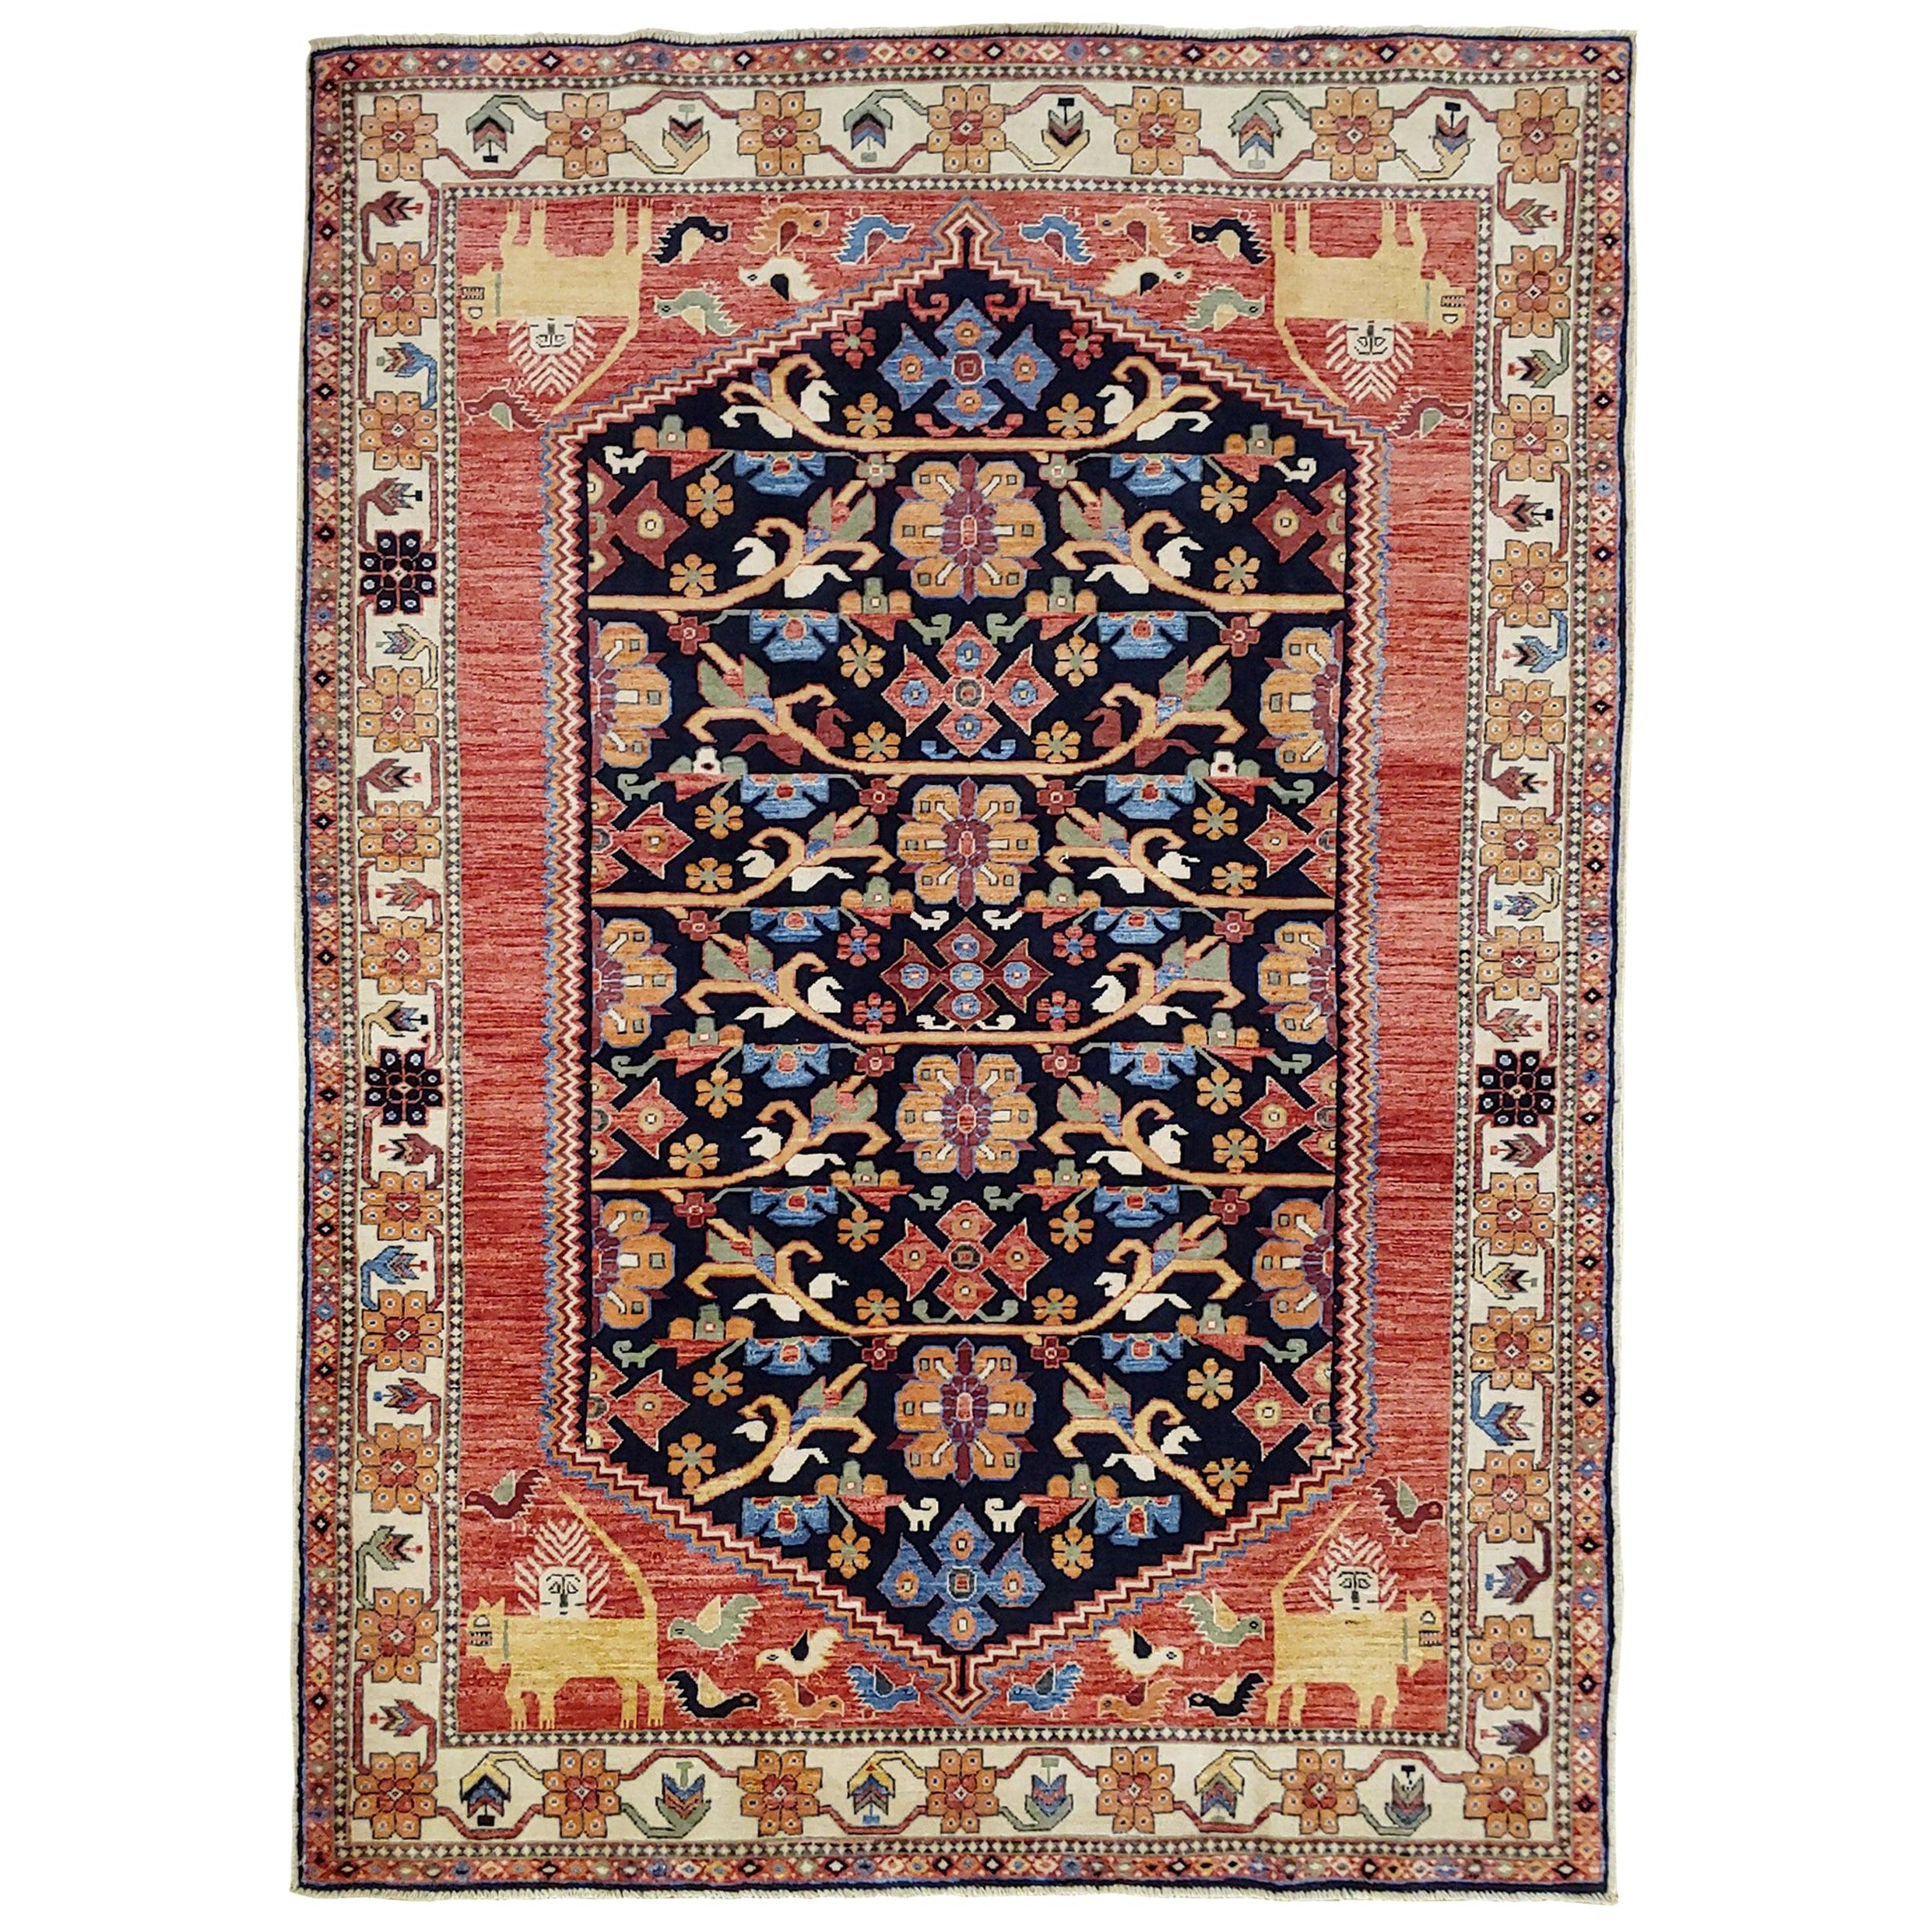 New Rug From Afghanistan, Persian Qashqai Shiraz Design, Wool, Natural Dyes 4x6 For Sale